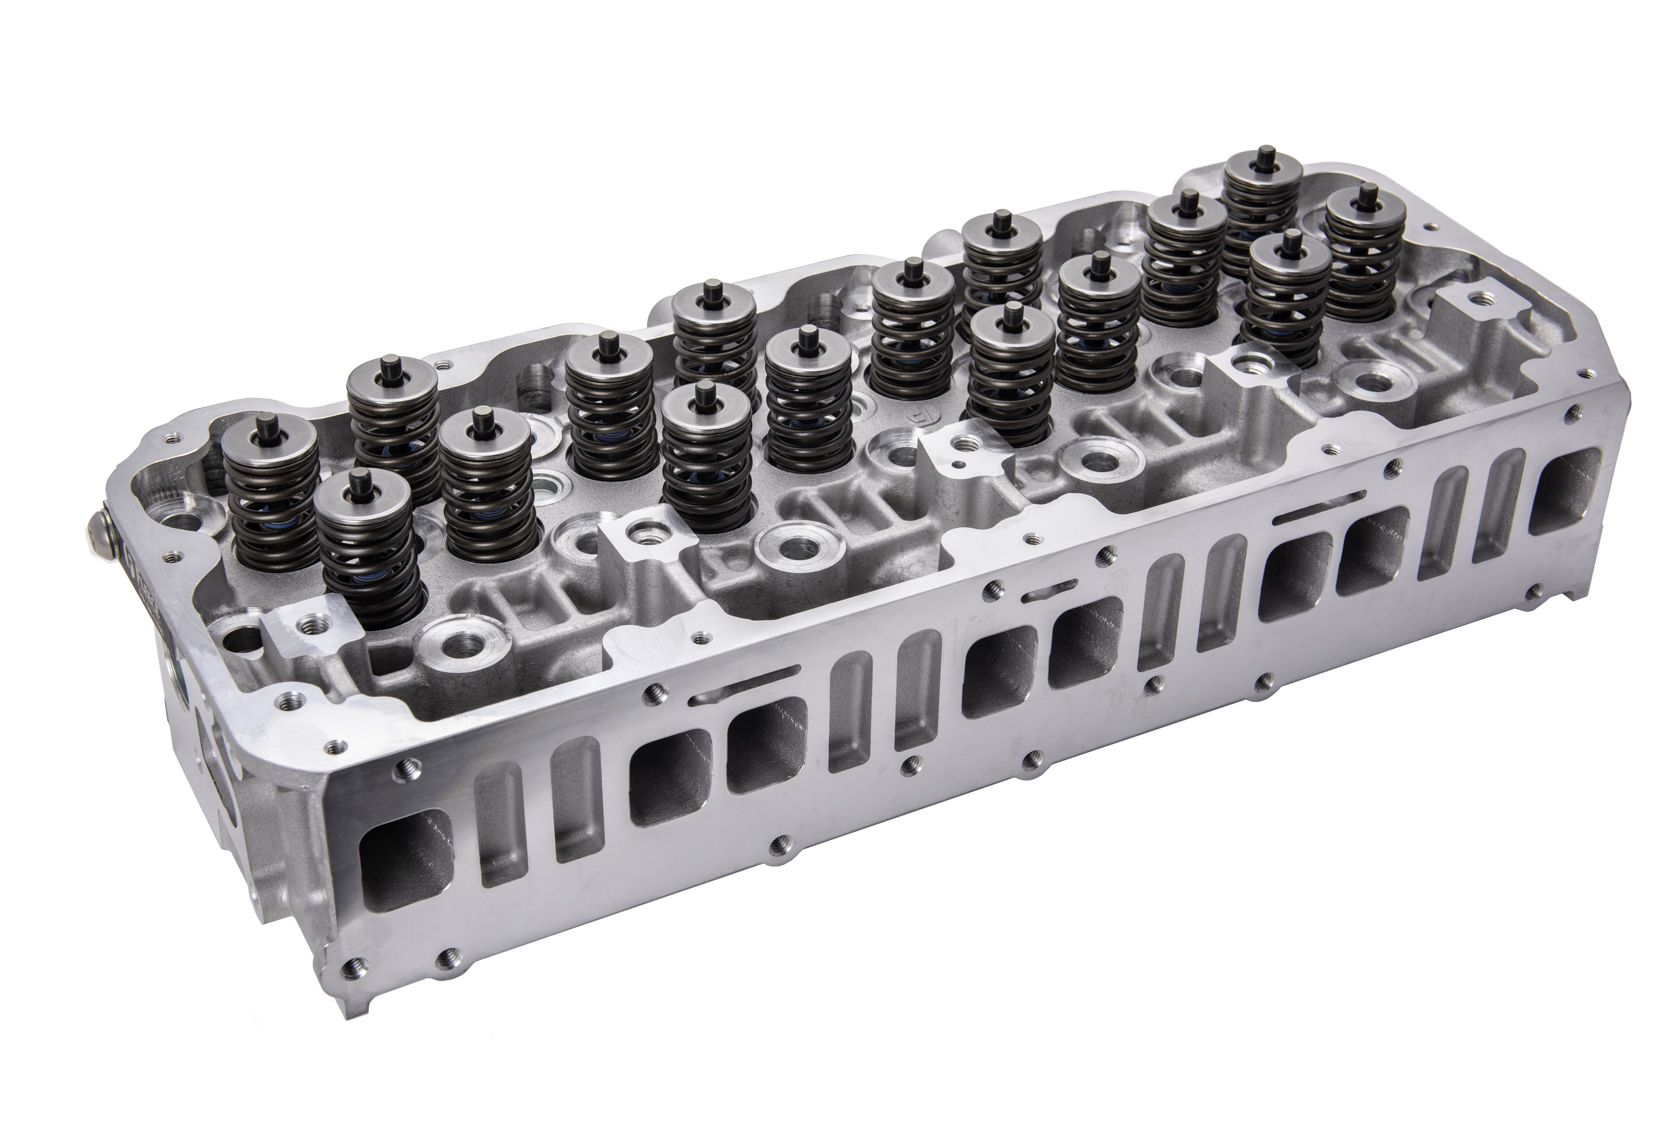 FPE-61-10001-P-CL Fleece / Freedom Series Duramax Cylinder Head with Cupless Injector Bore for 2001-2004 LB7 (Driver Side) Hell On Wheels Canada